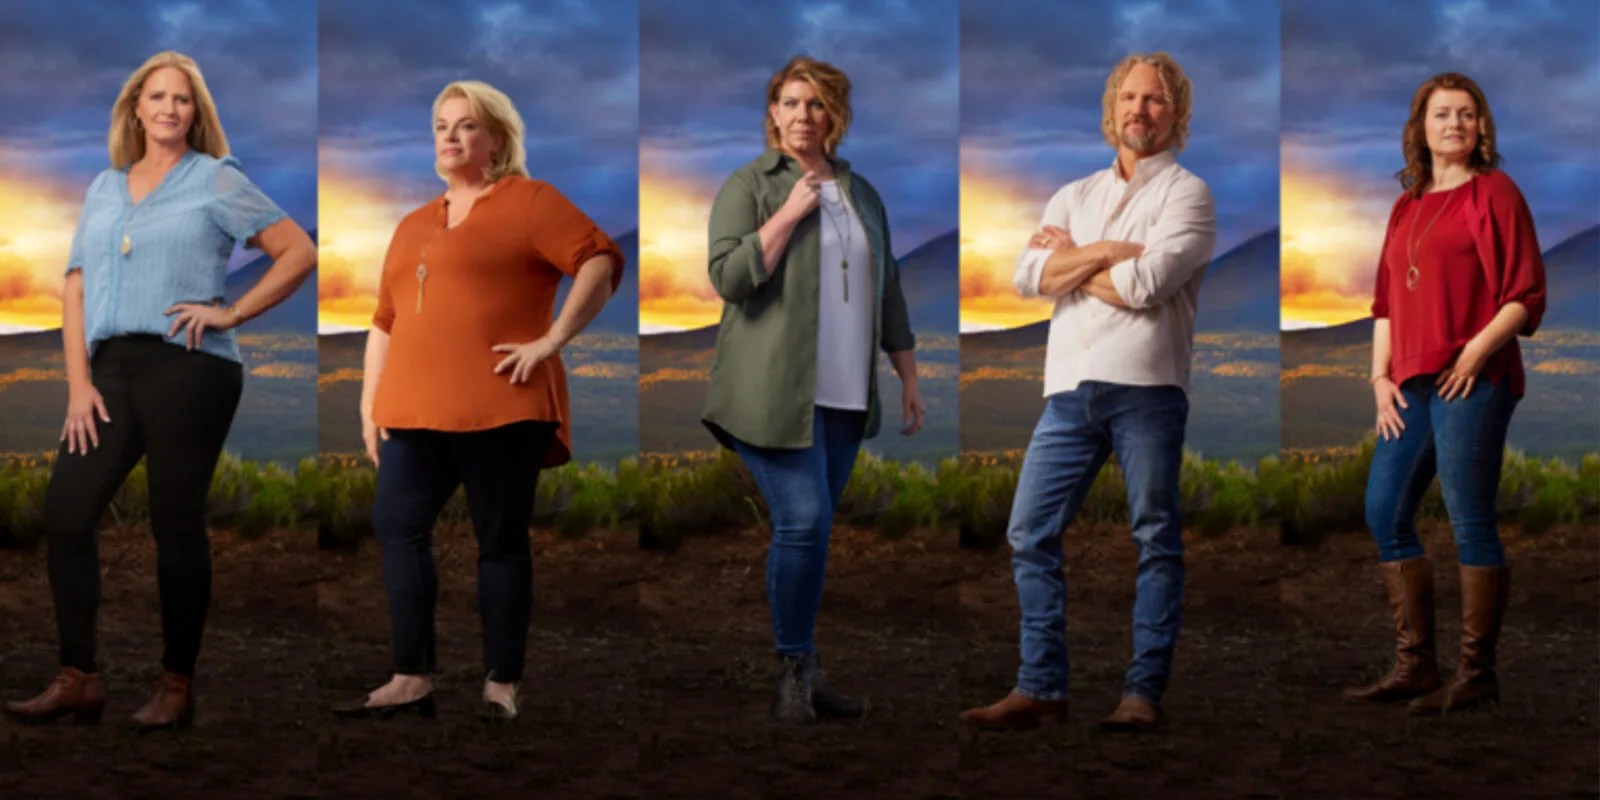 The cast of 'Sister Wives' season 18 includes Christine, Janelle, Meri, Kody, and Robyn Brown.